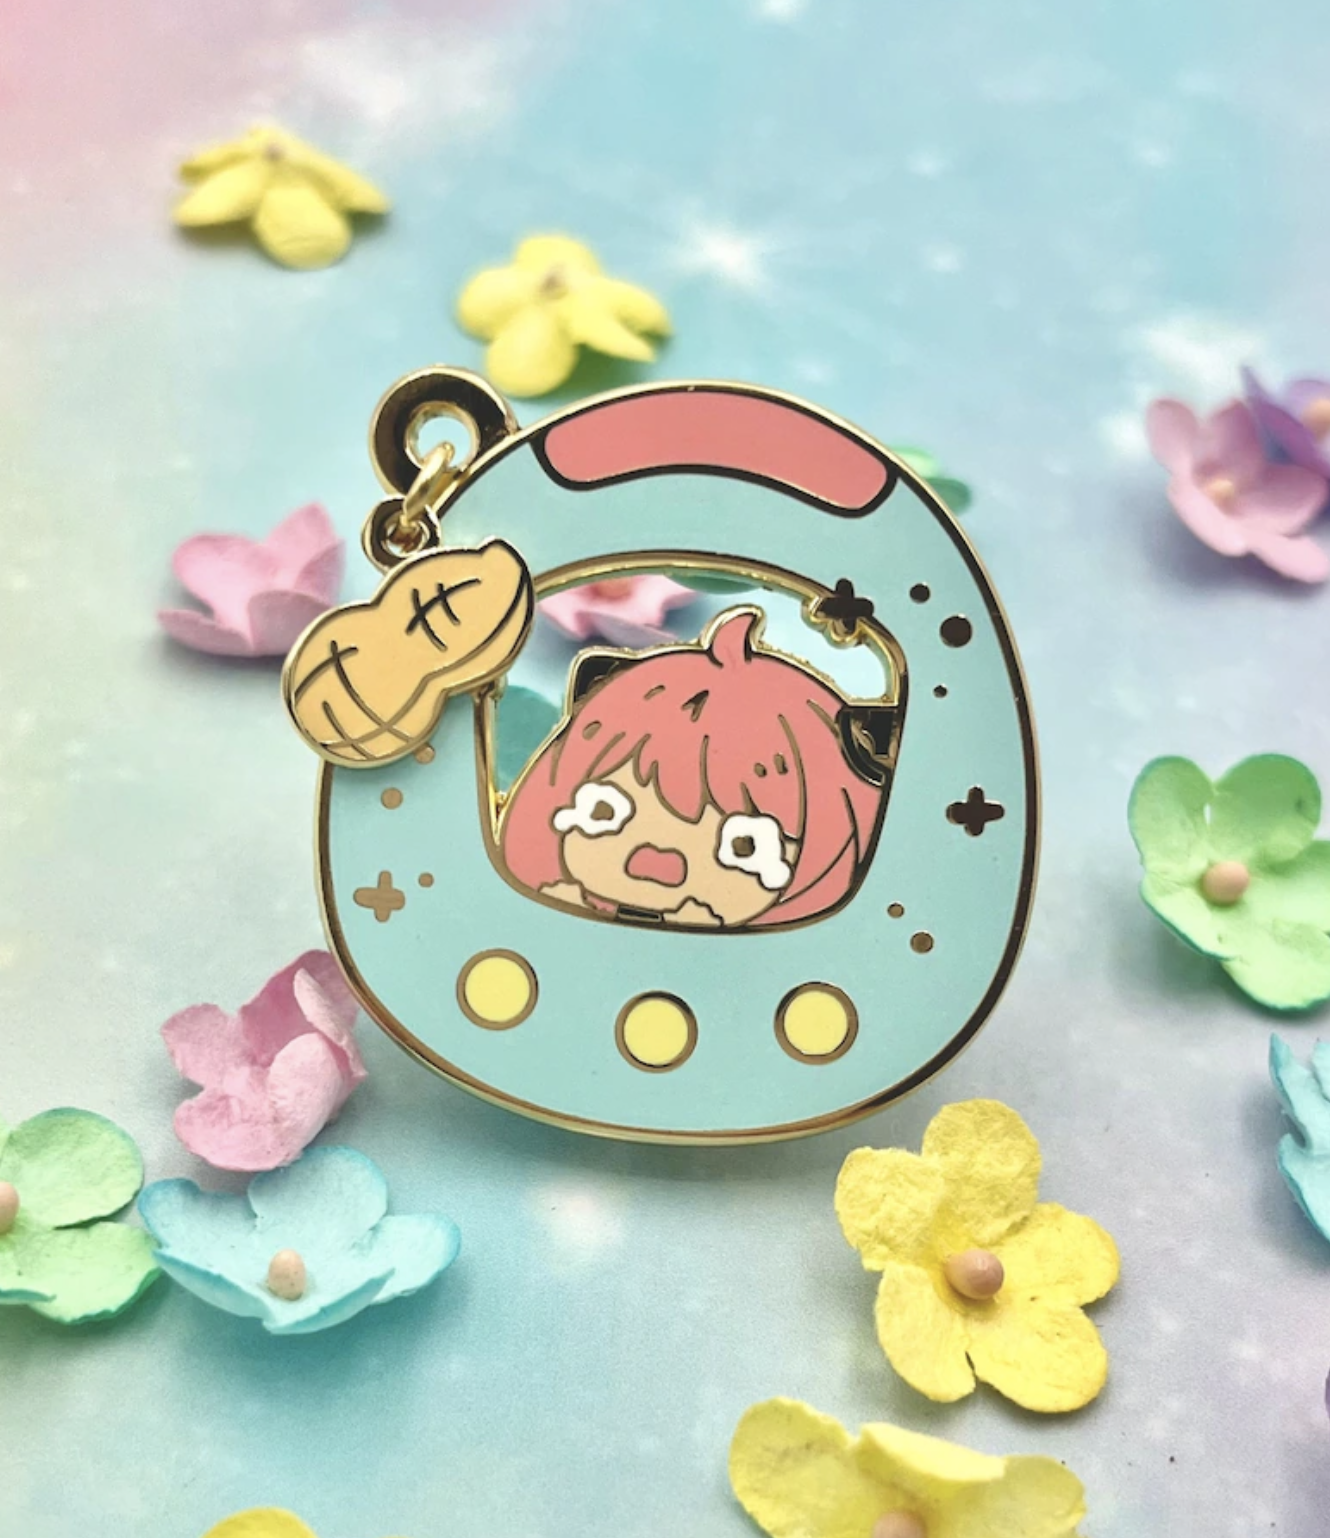 Enamel pin featuring an animated character with pink hair inside a spaceship, surrounded by flower confetti